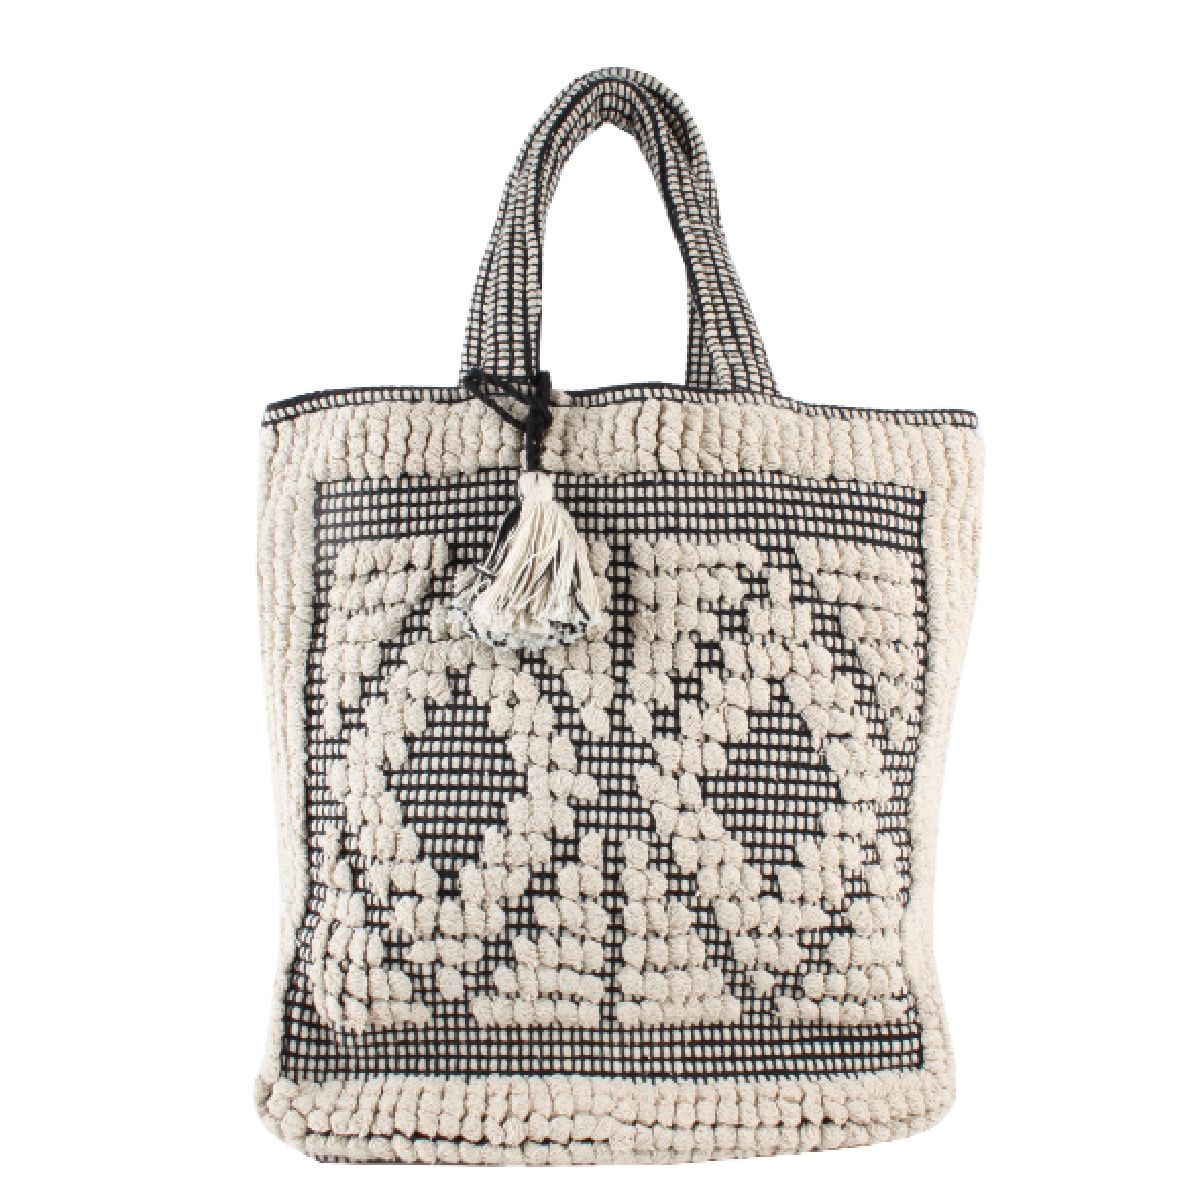 Co-Lab Cruise Hanalei Bay Tote